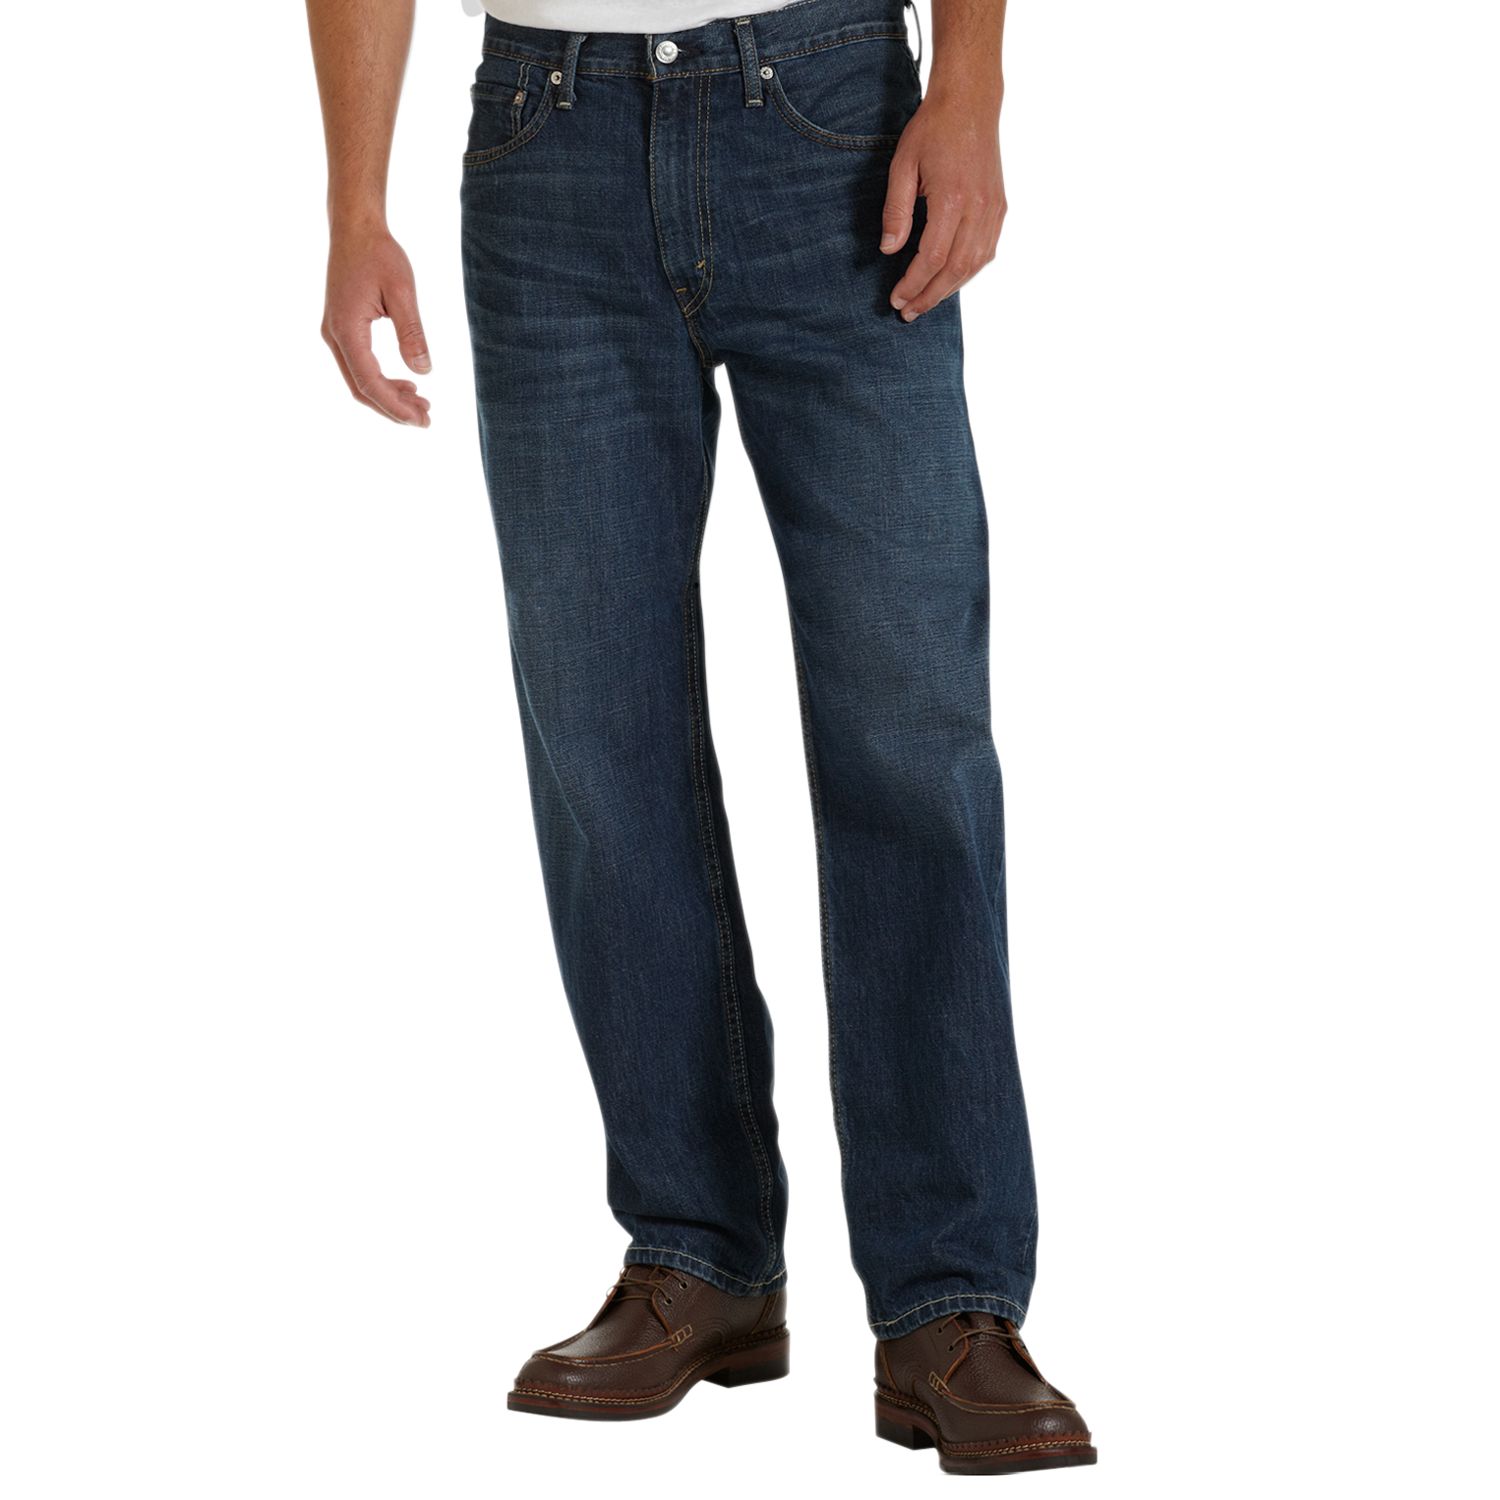 Levi's 550 Relaxed Fit Jeans - Men